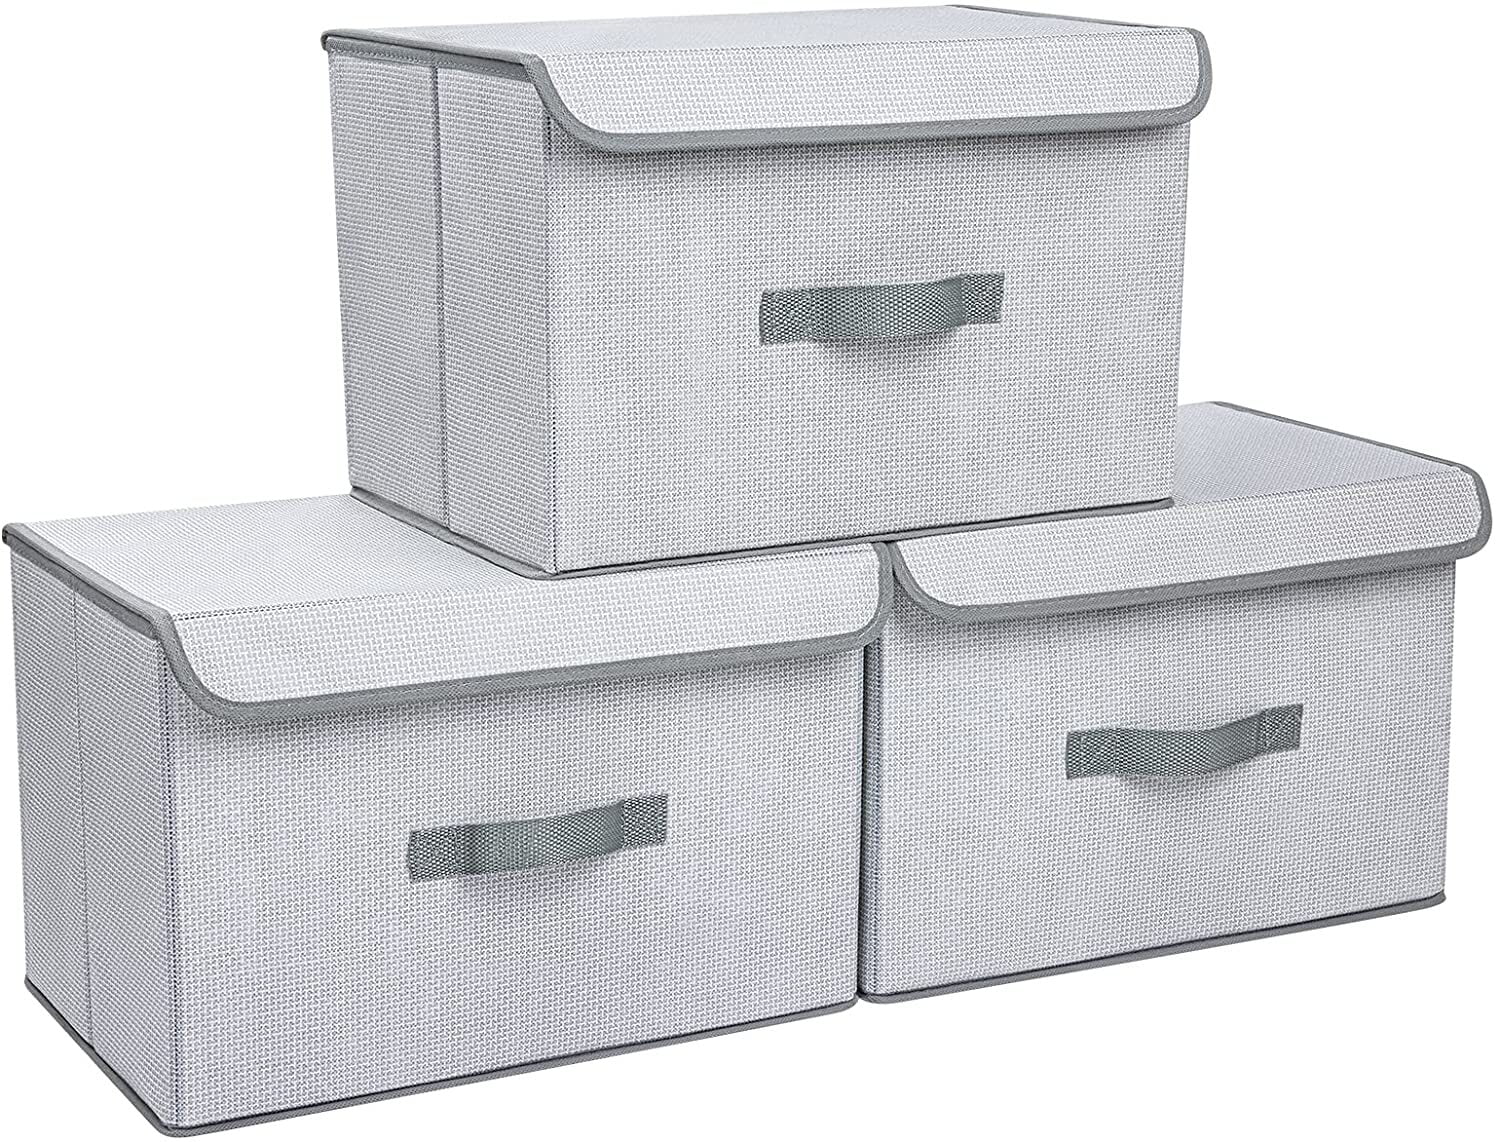 Granny Says Extra Large Storage Bins with Lids, Decorative Storage Boxes, Stackable Storage Containers for Living Room, Gray/White, 3-Pack